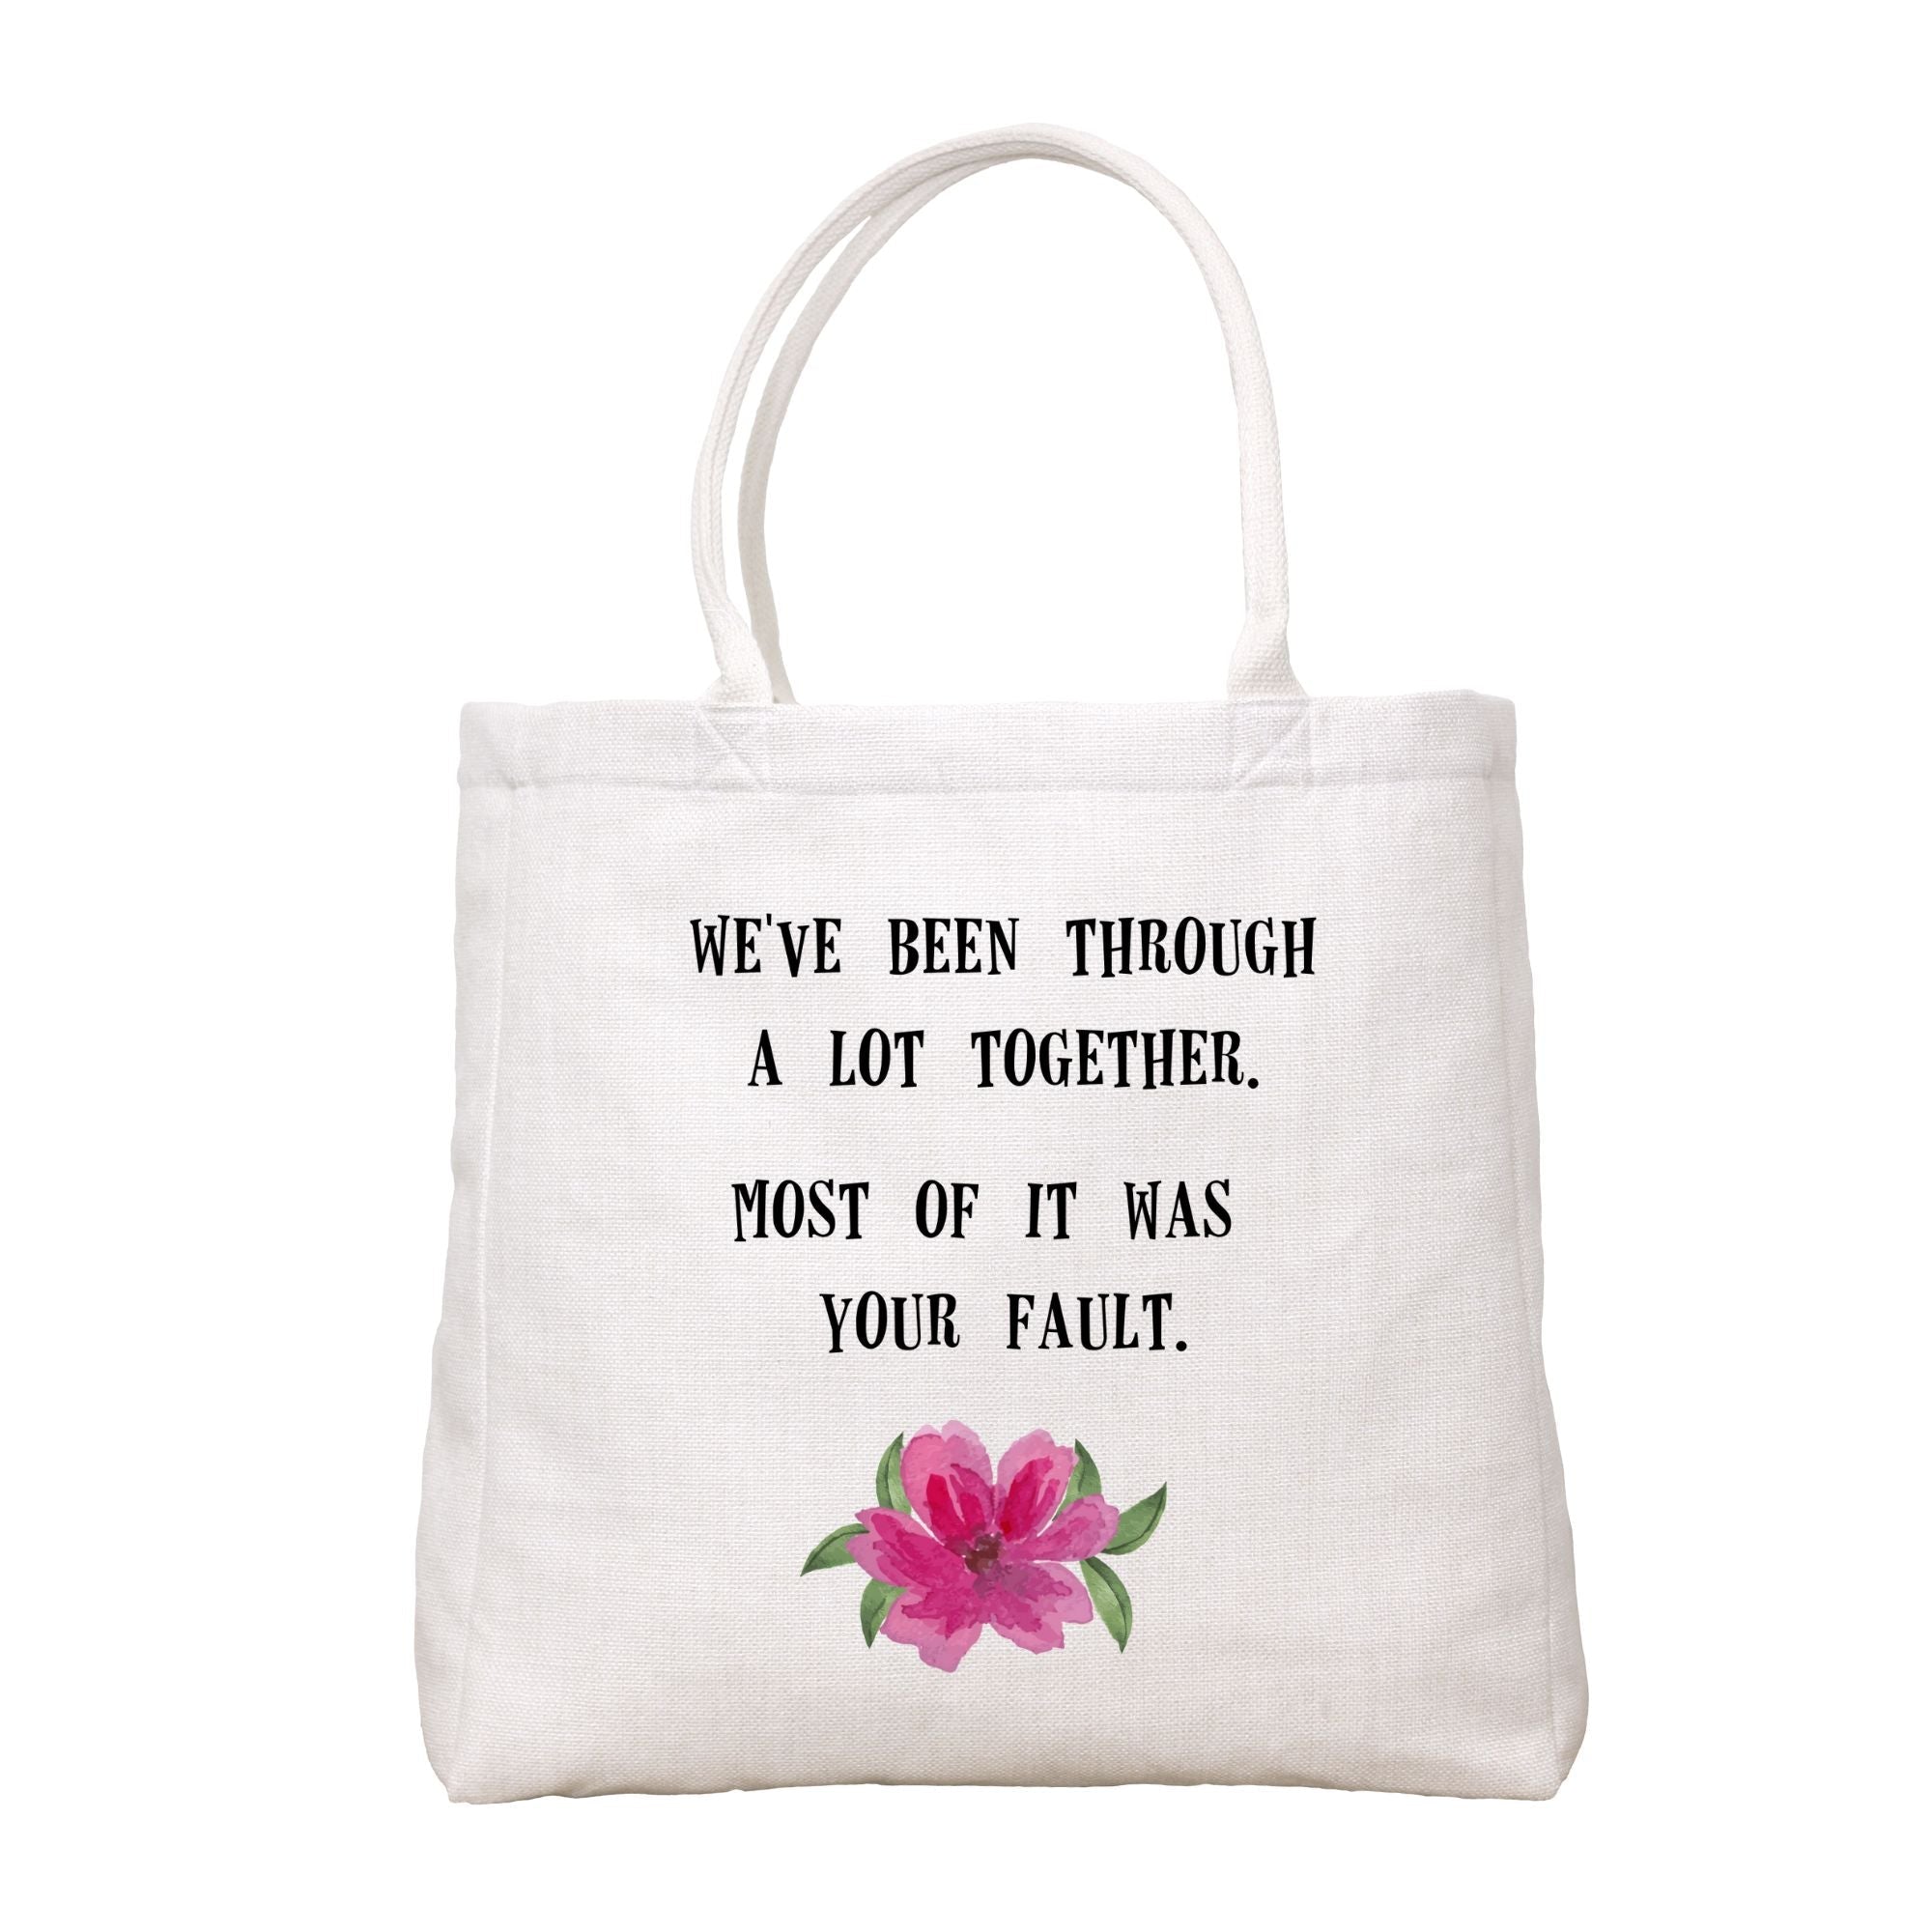 Your Fault Tote Bag